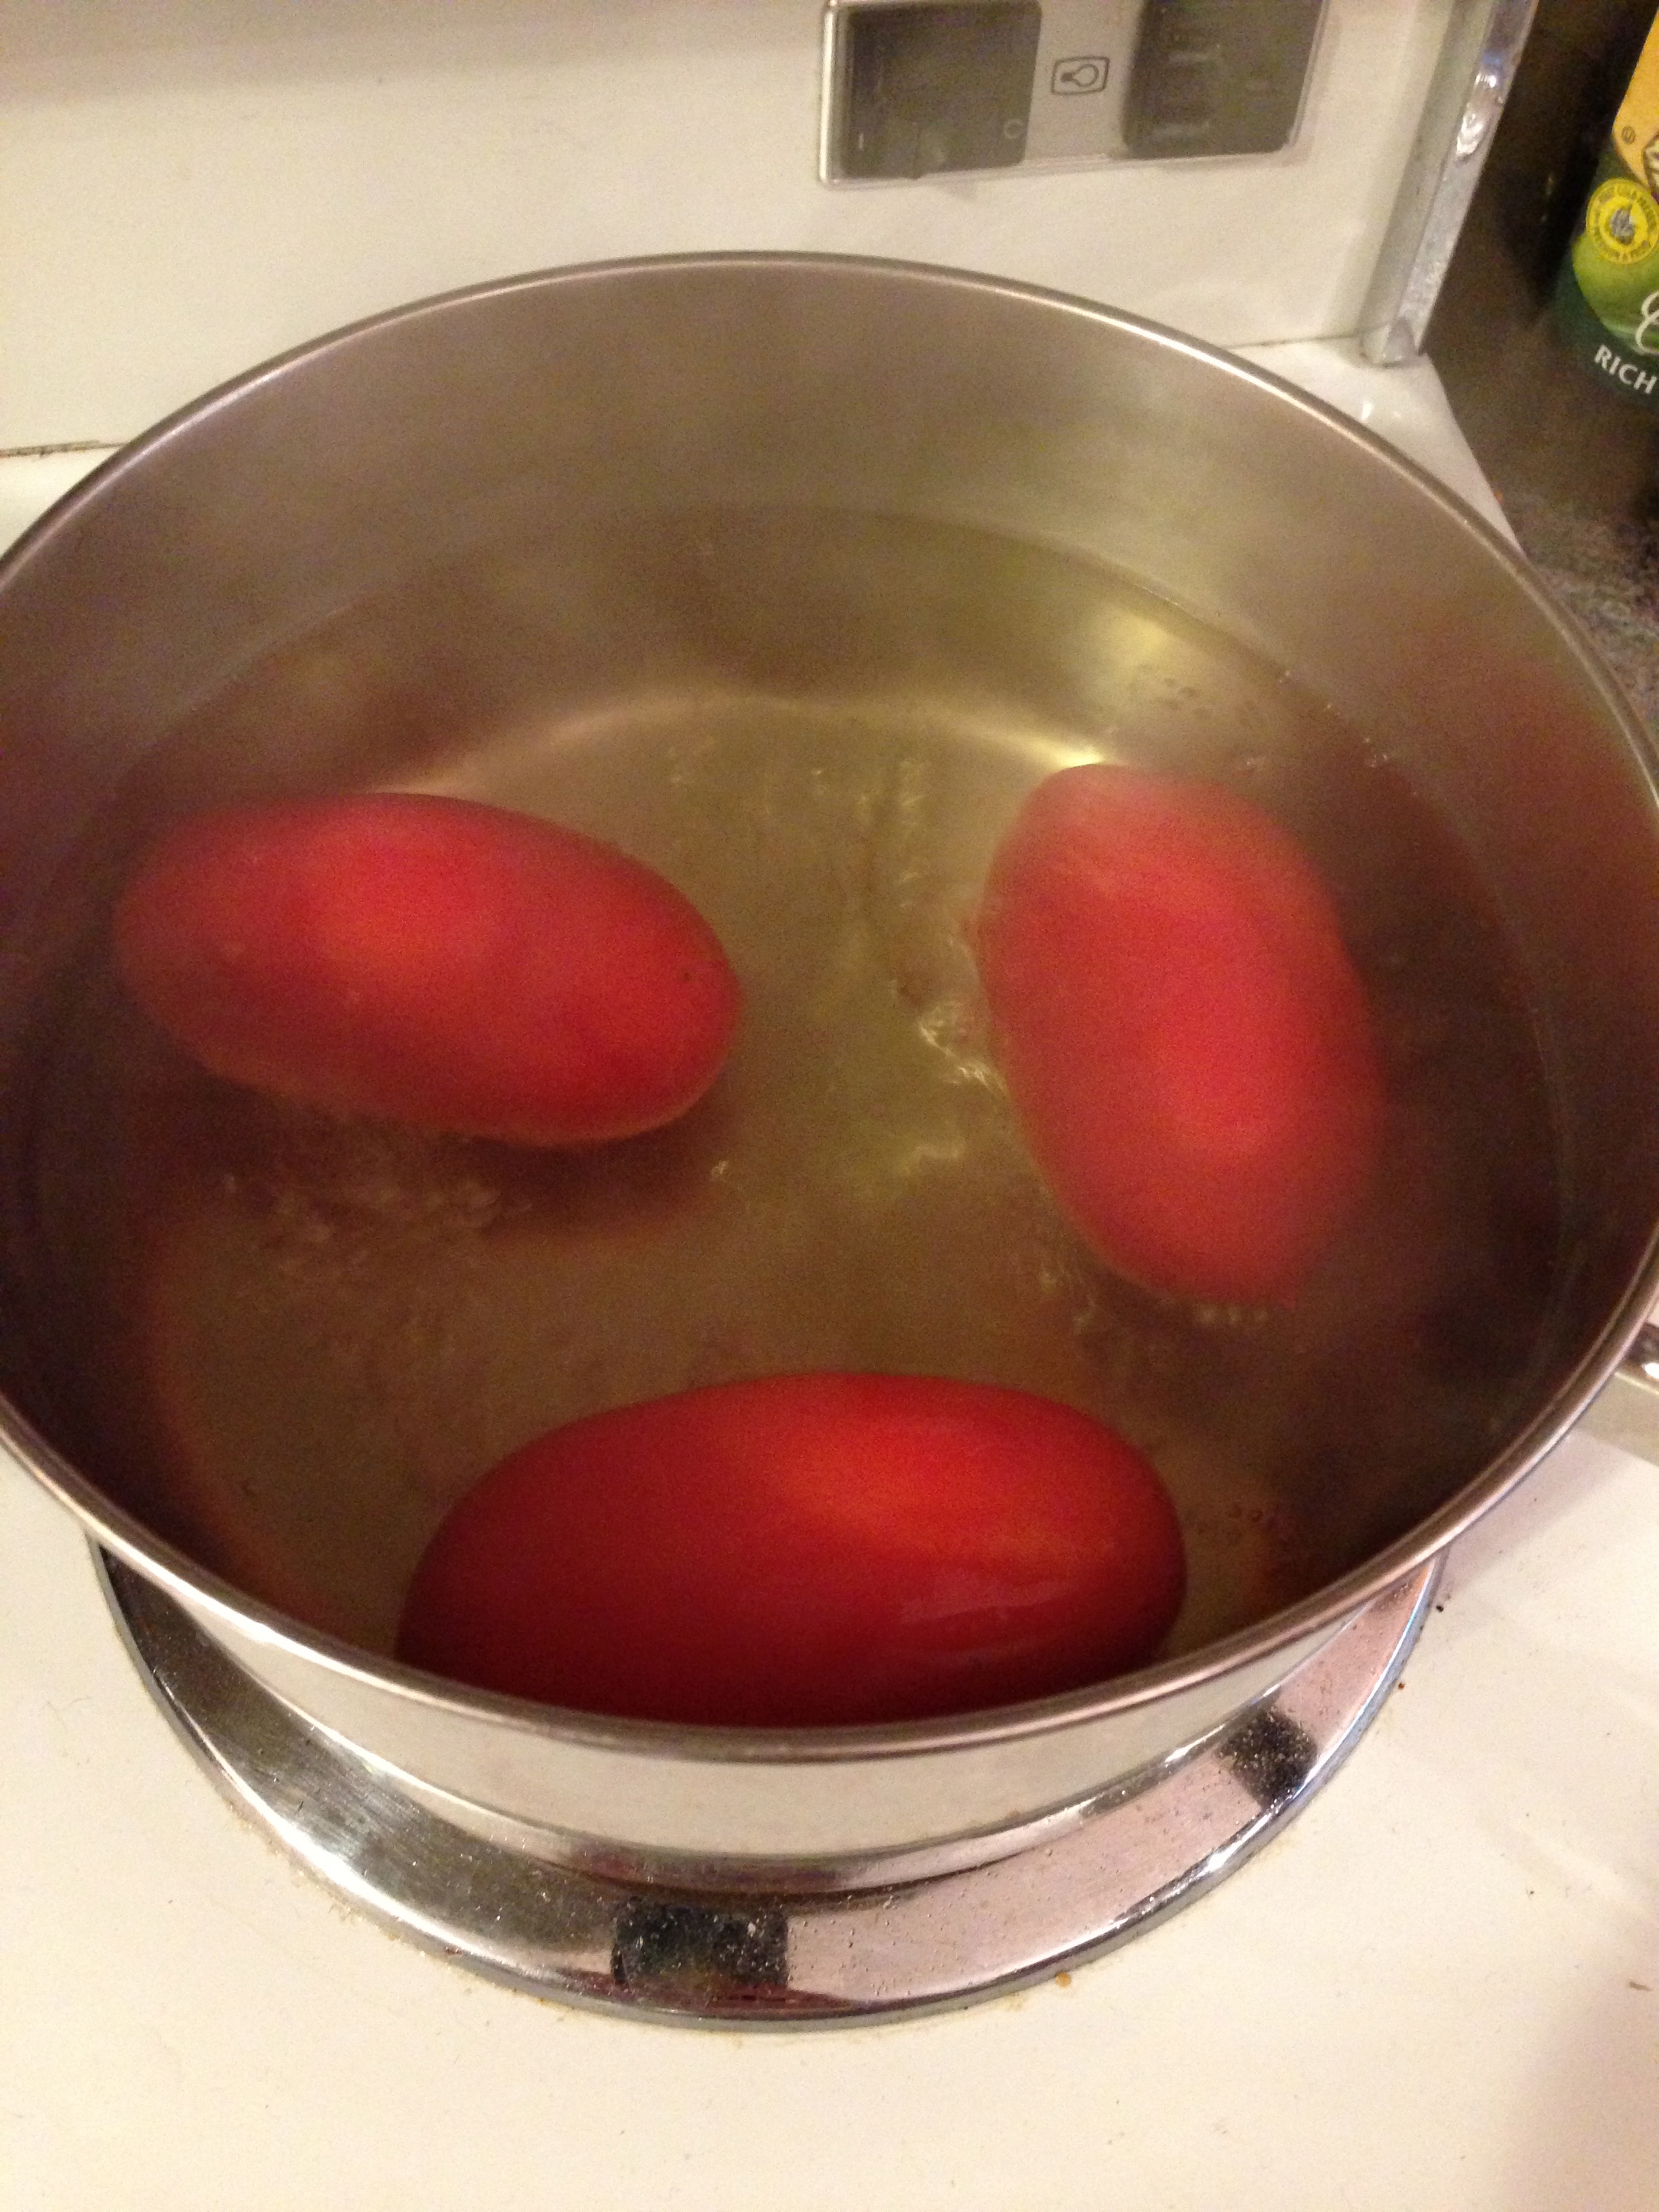 Blanching the tomatoes